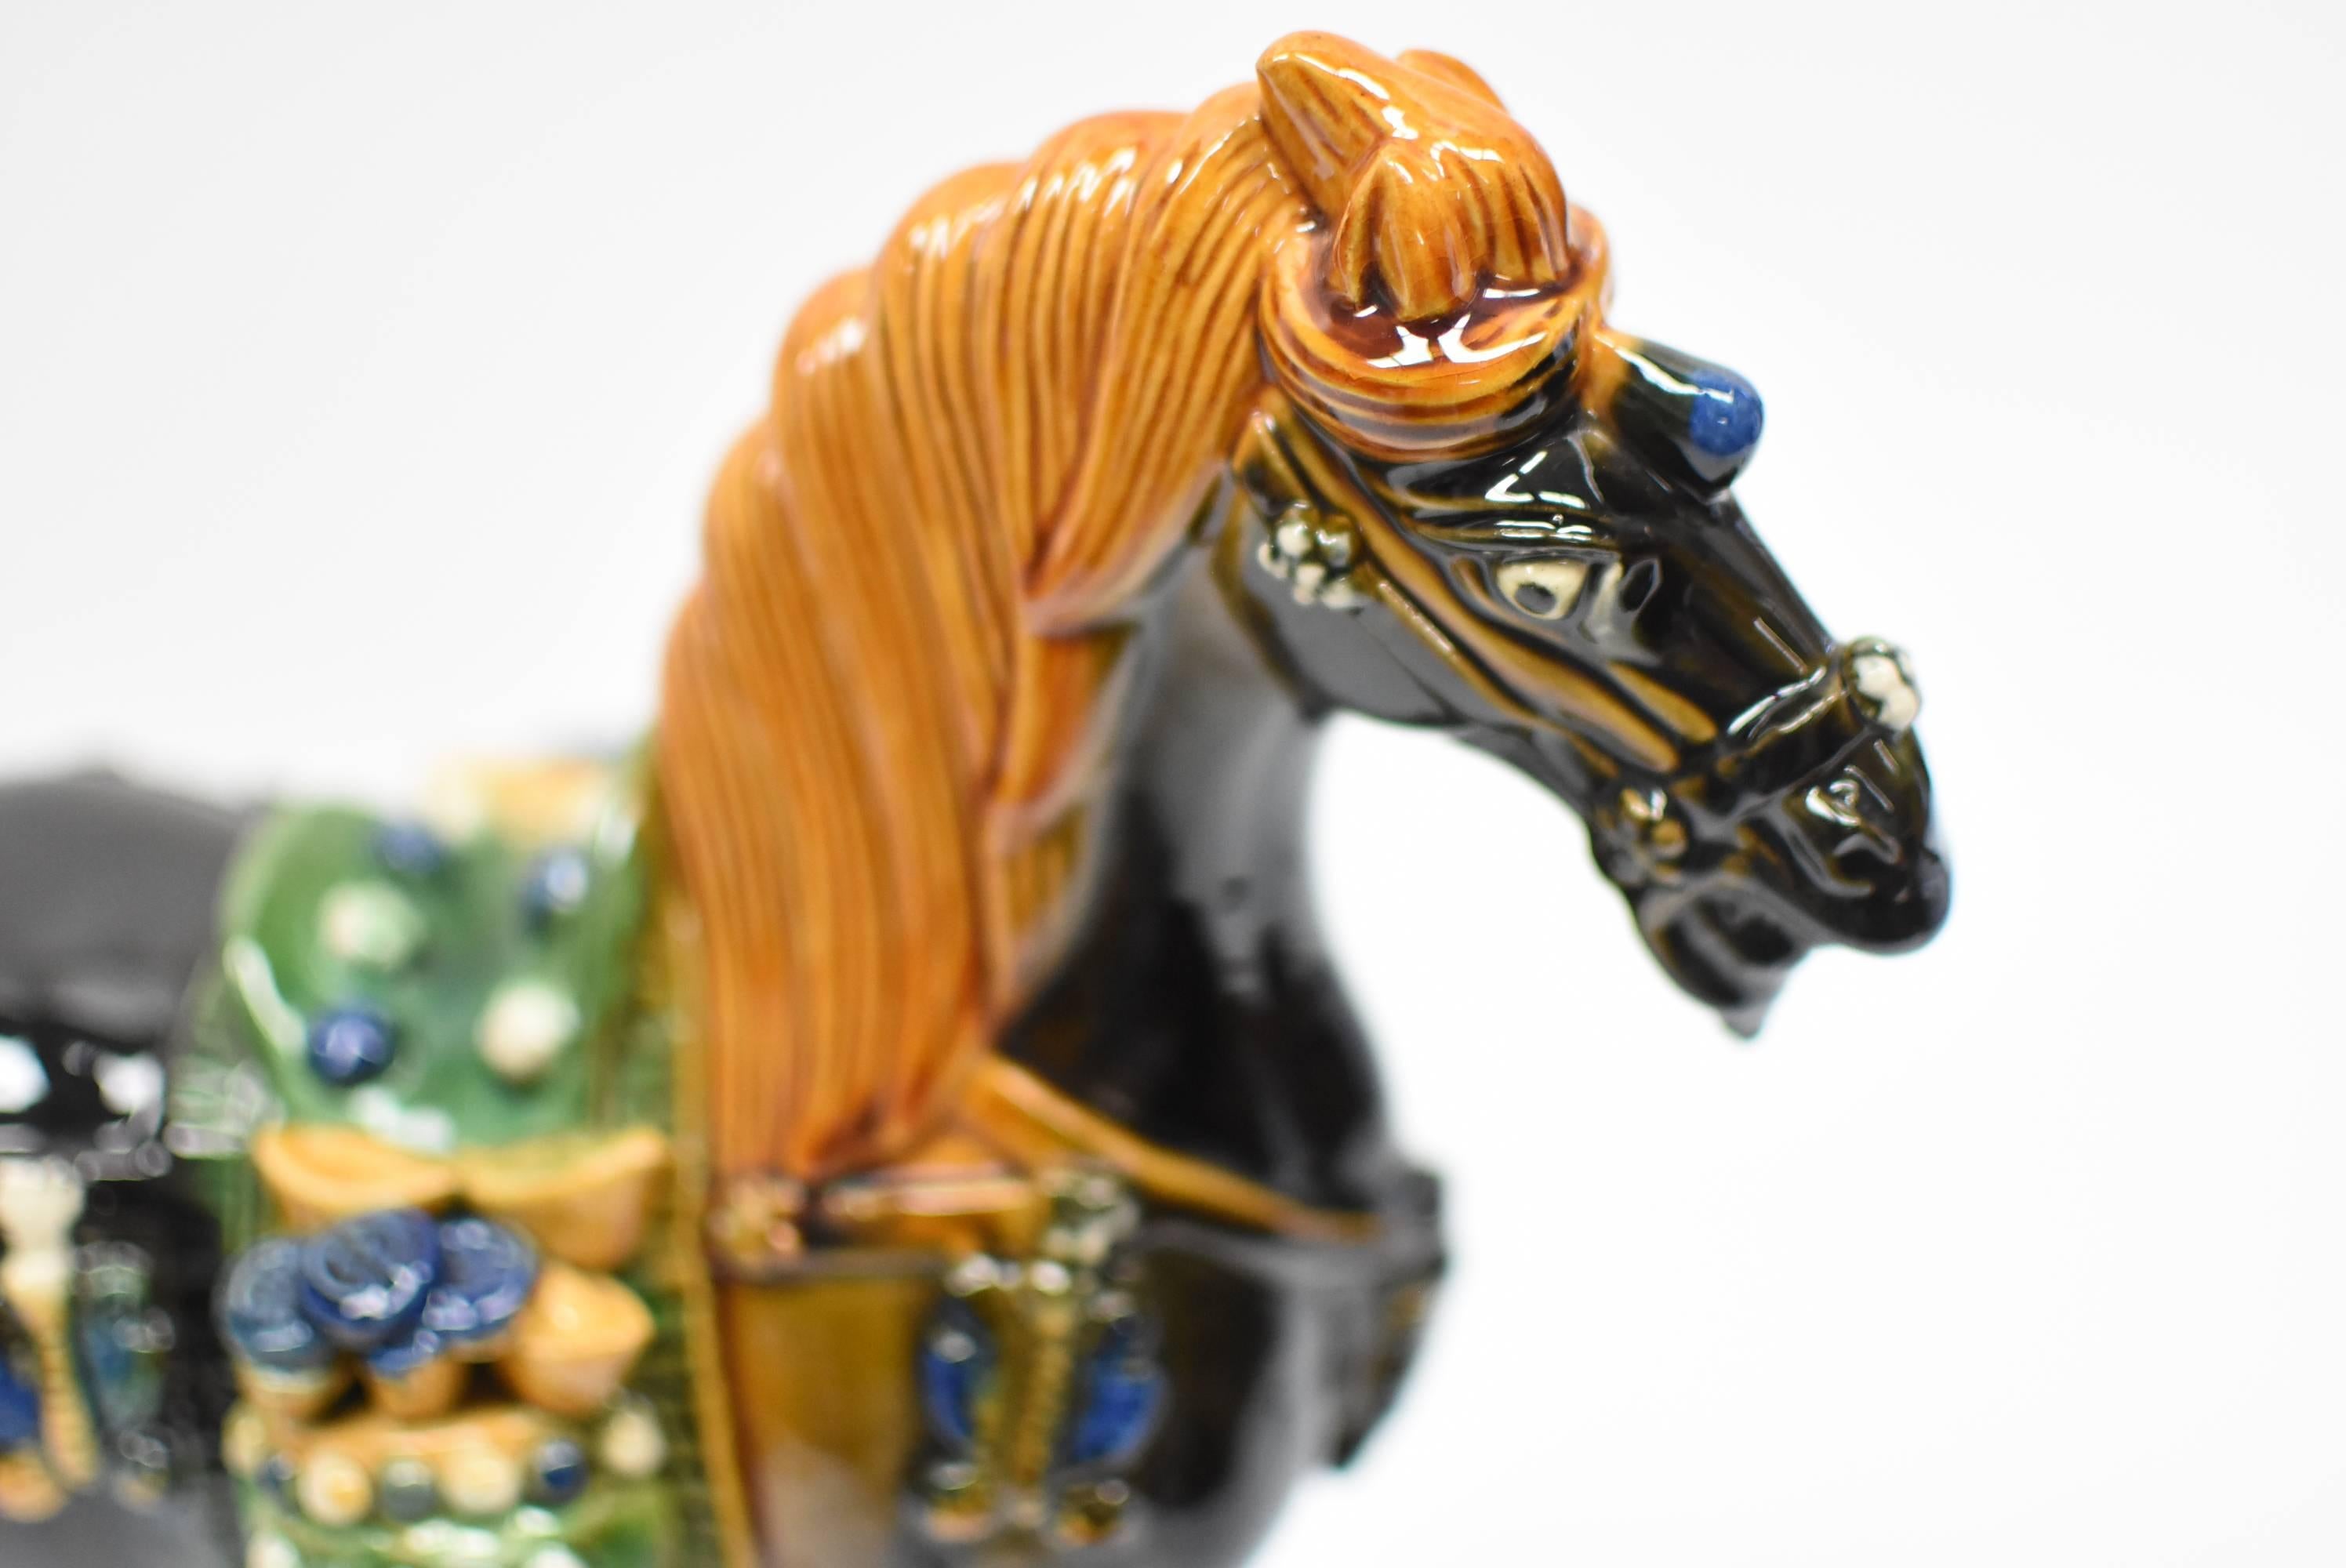 A beautiful black, San Cai horse in high gloss. The Sancai technique dates back to the Tang dynasty (618–907AD). This wonderful piece has all the hallmarks of Tang San Cai terracotta potteries with skillfully applied glaze achieving amazing artistic